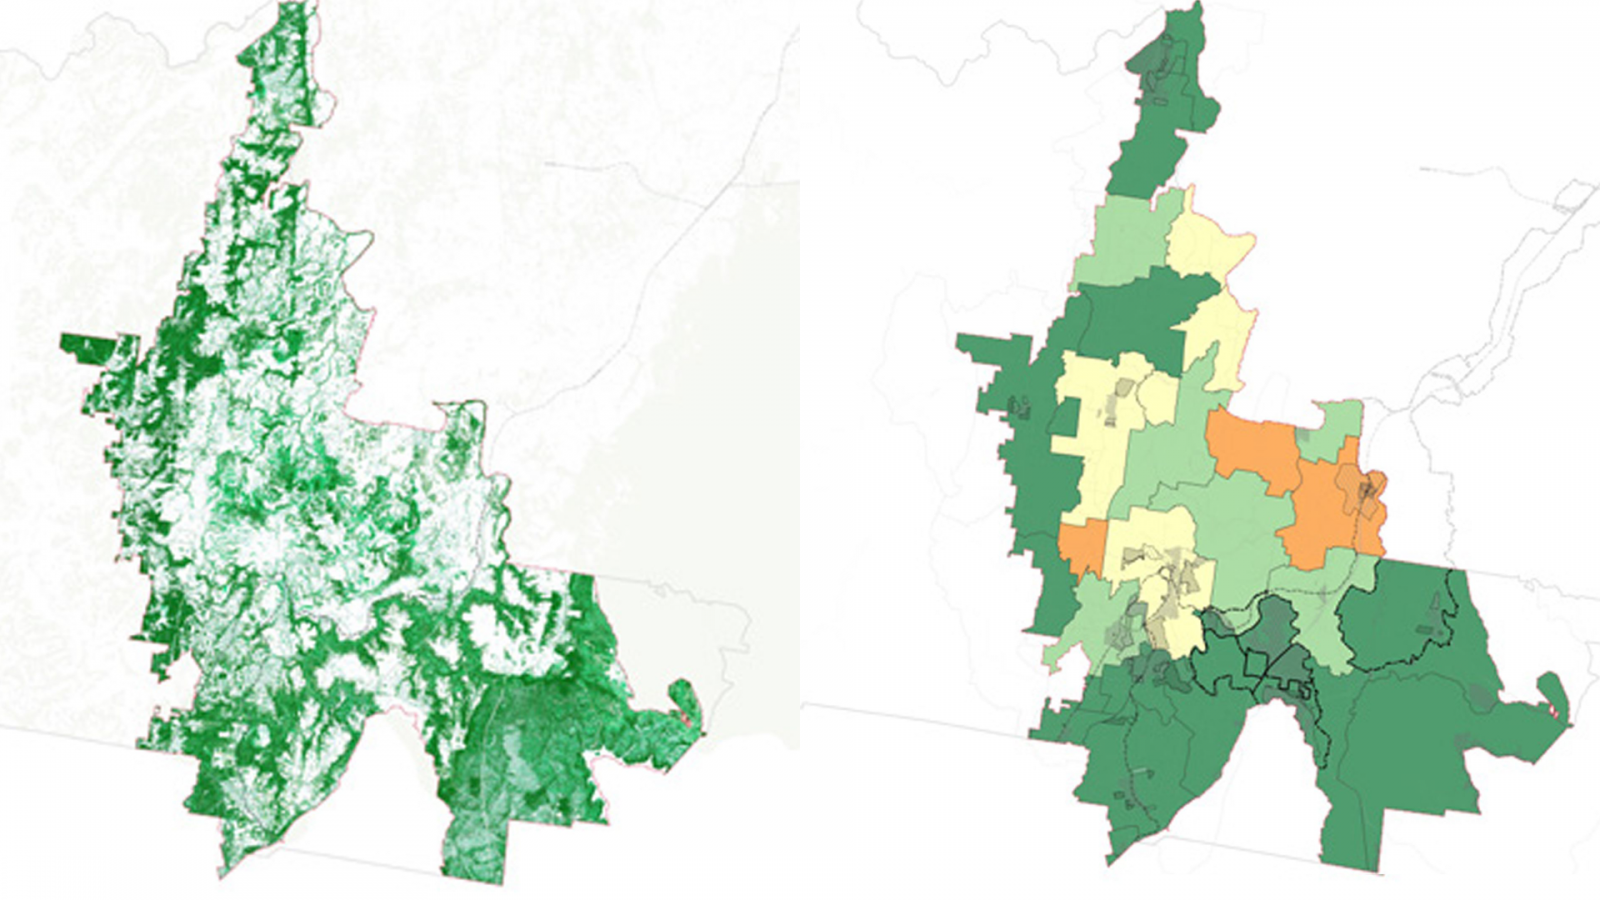 Side-by-side maps: Left shows a dense green coverage of vegetation; right illustrates the Urban Tree Canopy Plan for Wollondilly with administrative divisions in varying shades of green, yellow, and orange, indicating different data values. The maps depict the same geographic area.